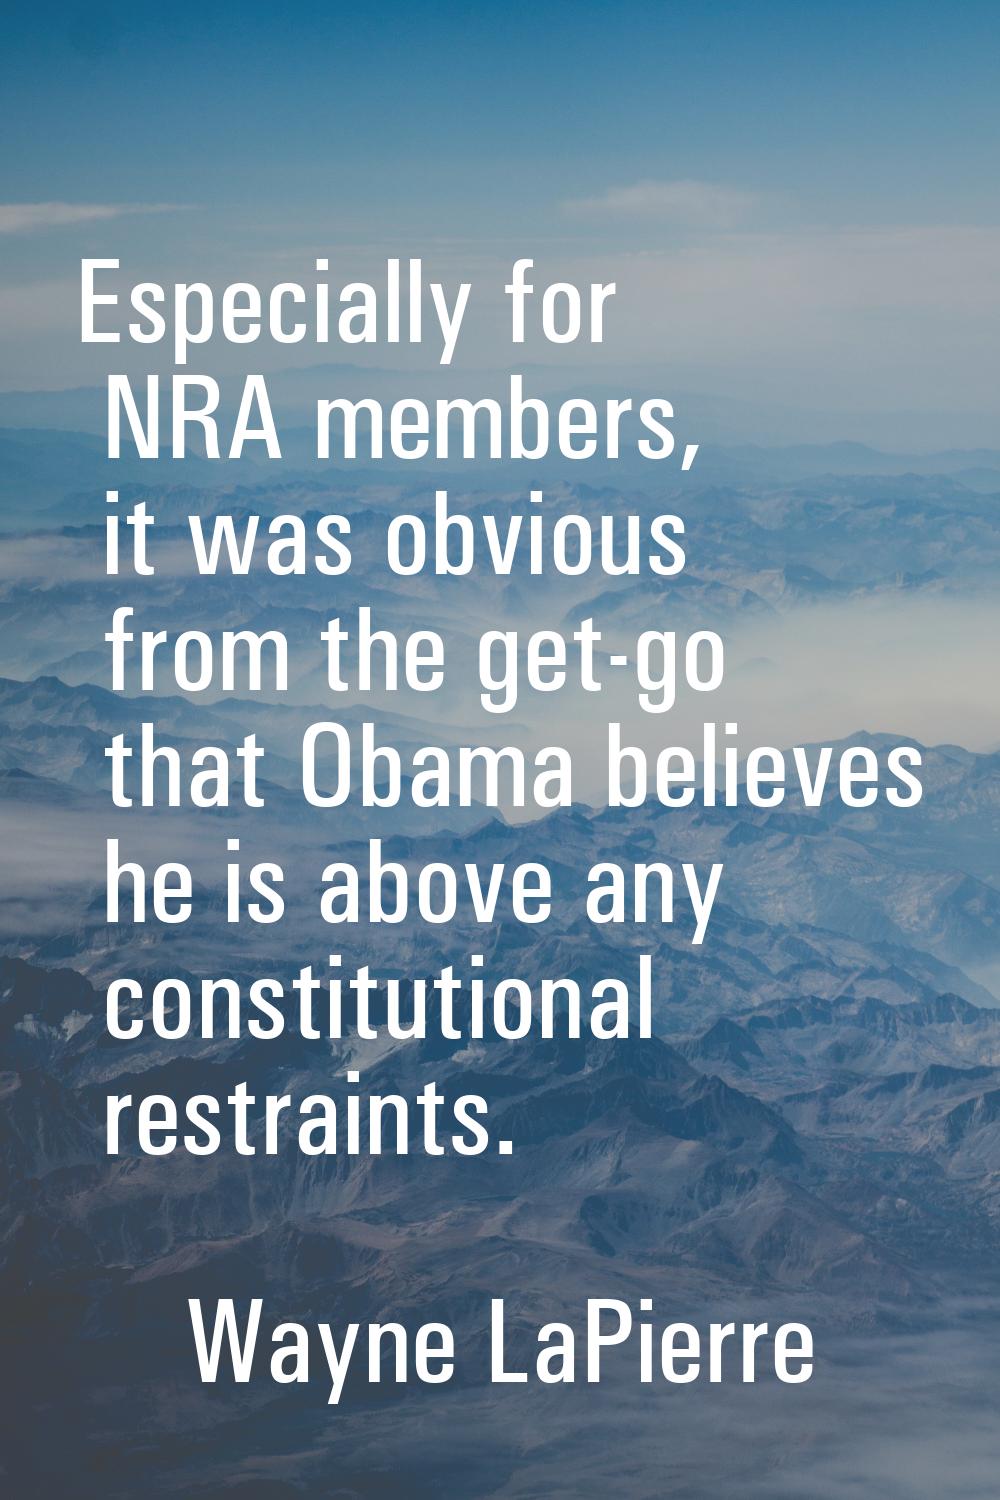 Especially for NRA members, it was obvious from the get-go that Obama believes he is above any cons